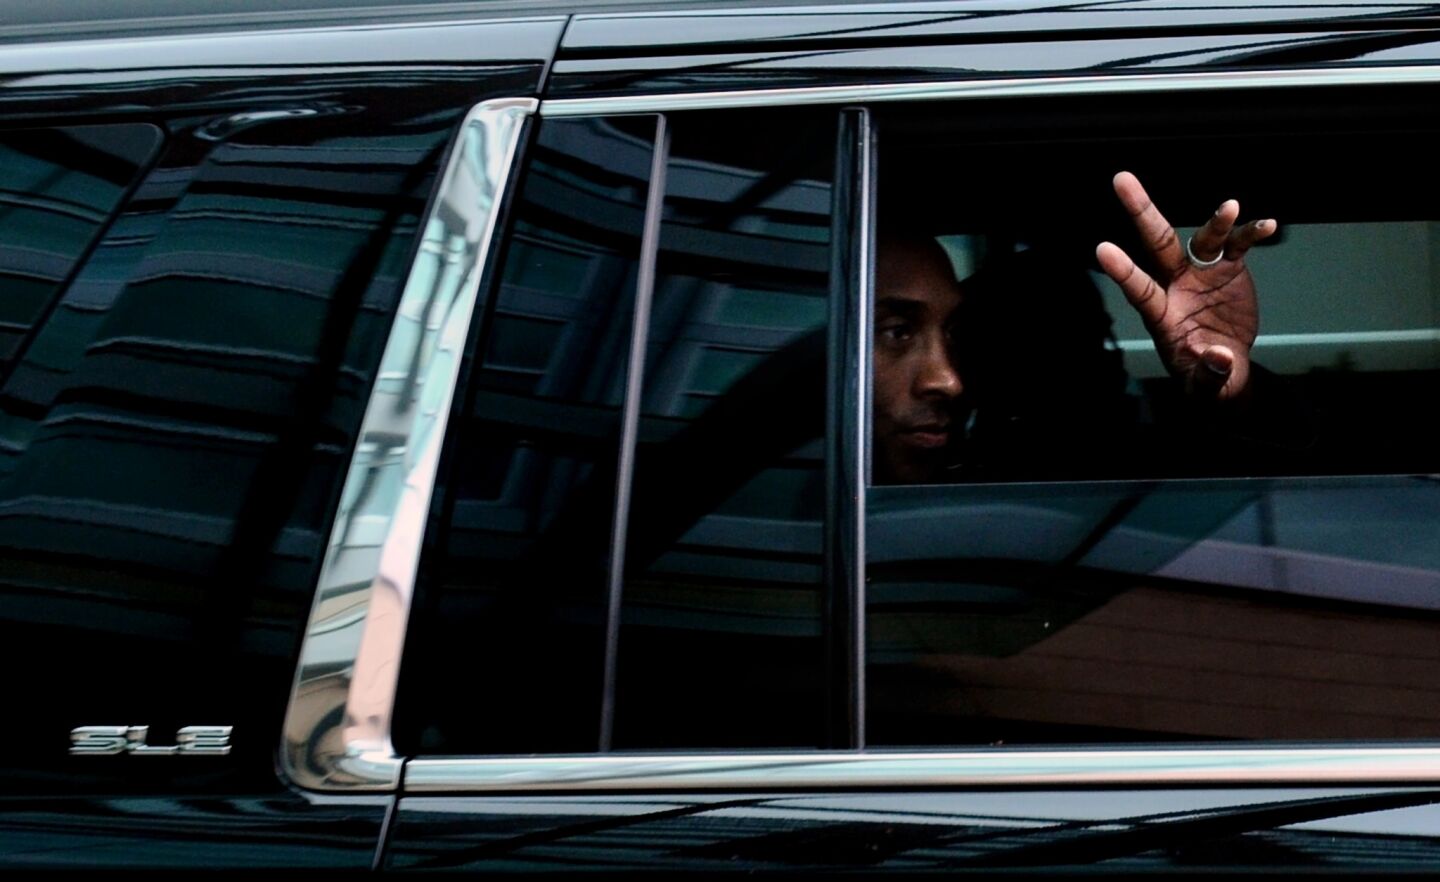 Lakers star Kobe Bryant waves to a cheering crowd from a vehicle outside the Westin Hotel in Memphis, Tenn., beforea game against the Grizzlies on Feb. 24, 2016.